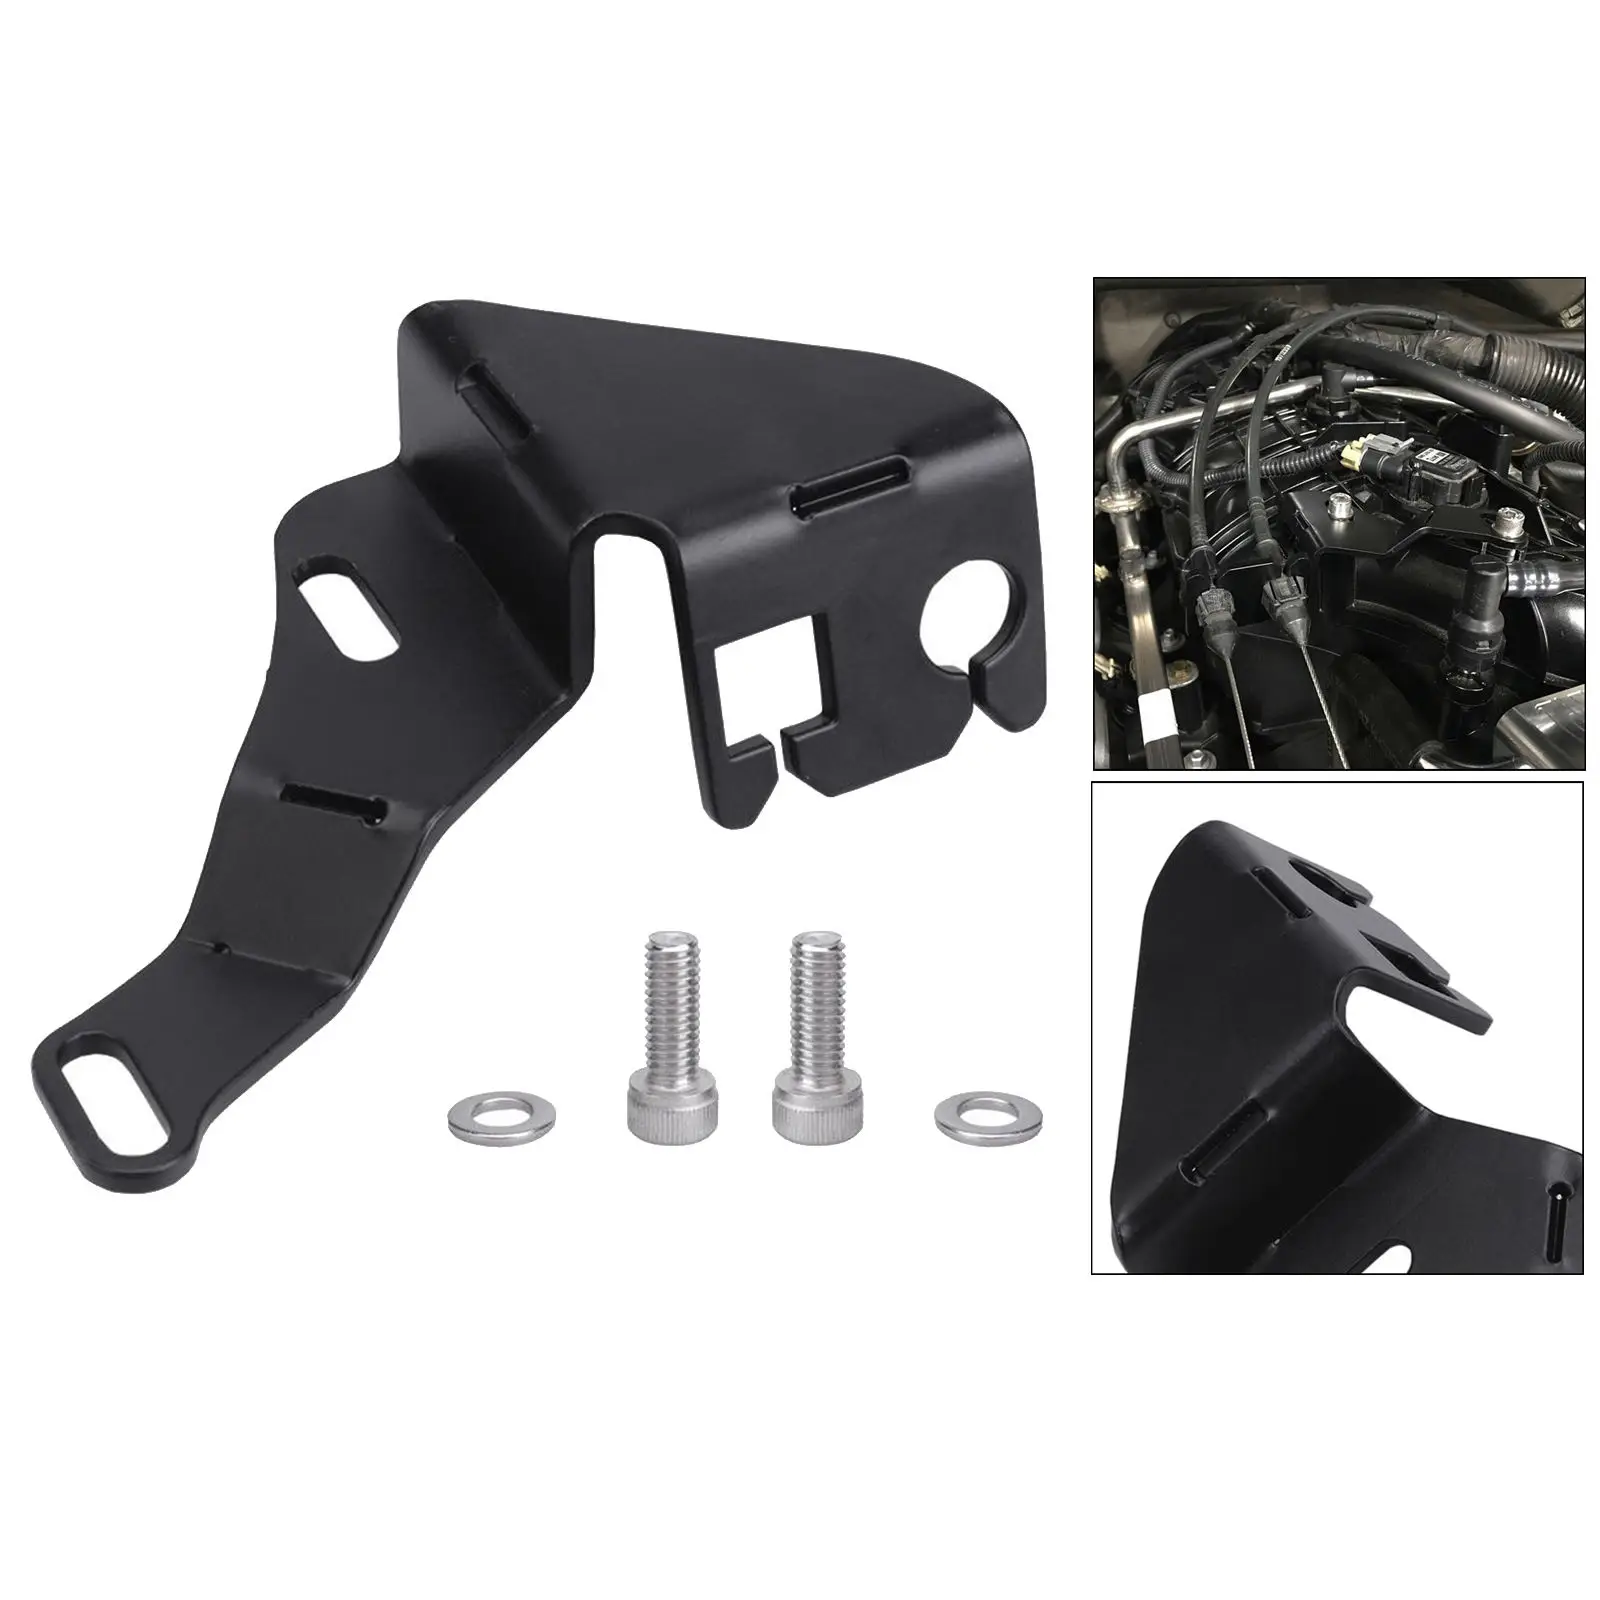 Professional Intake Manifold Throttle Cable Bracket Replaces fits for TBSS/NNBS/L92,Strong Material